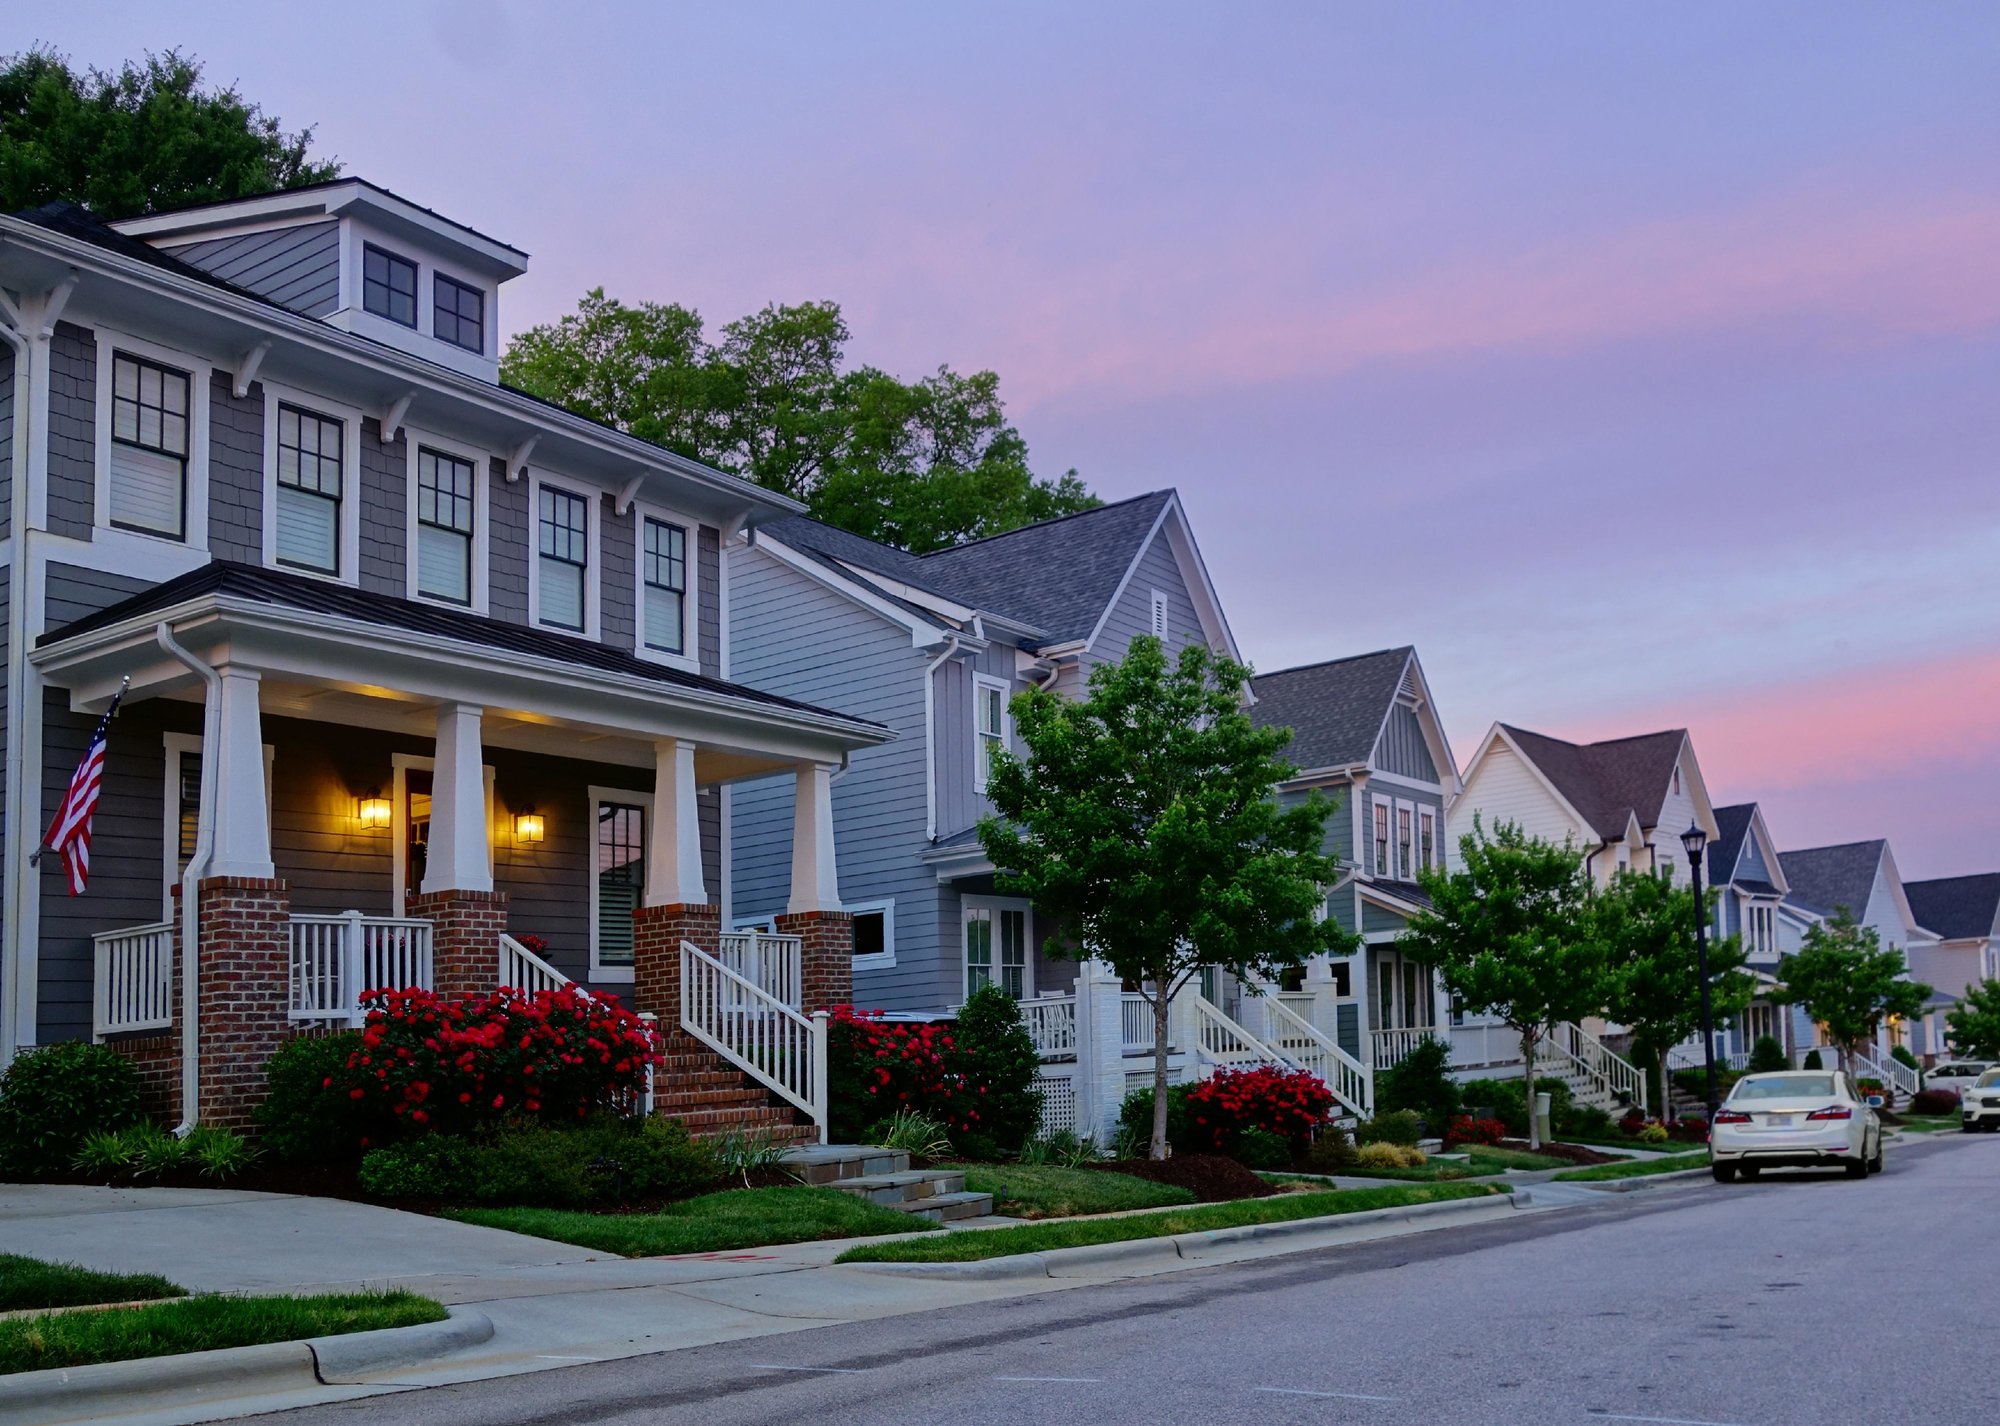 “Residential street with two-story homes” - Source: zimmytws // Shutterstock